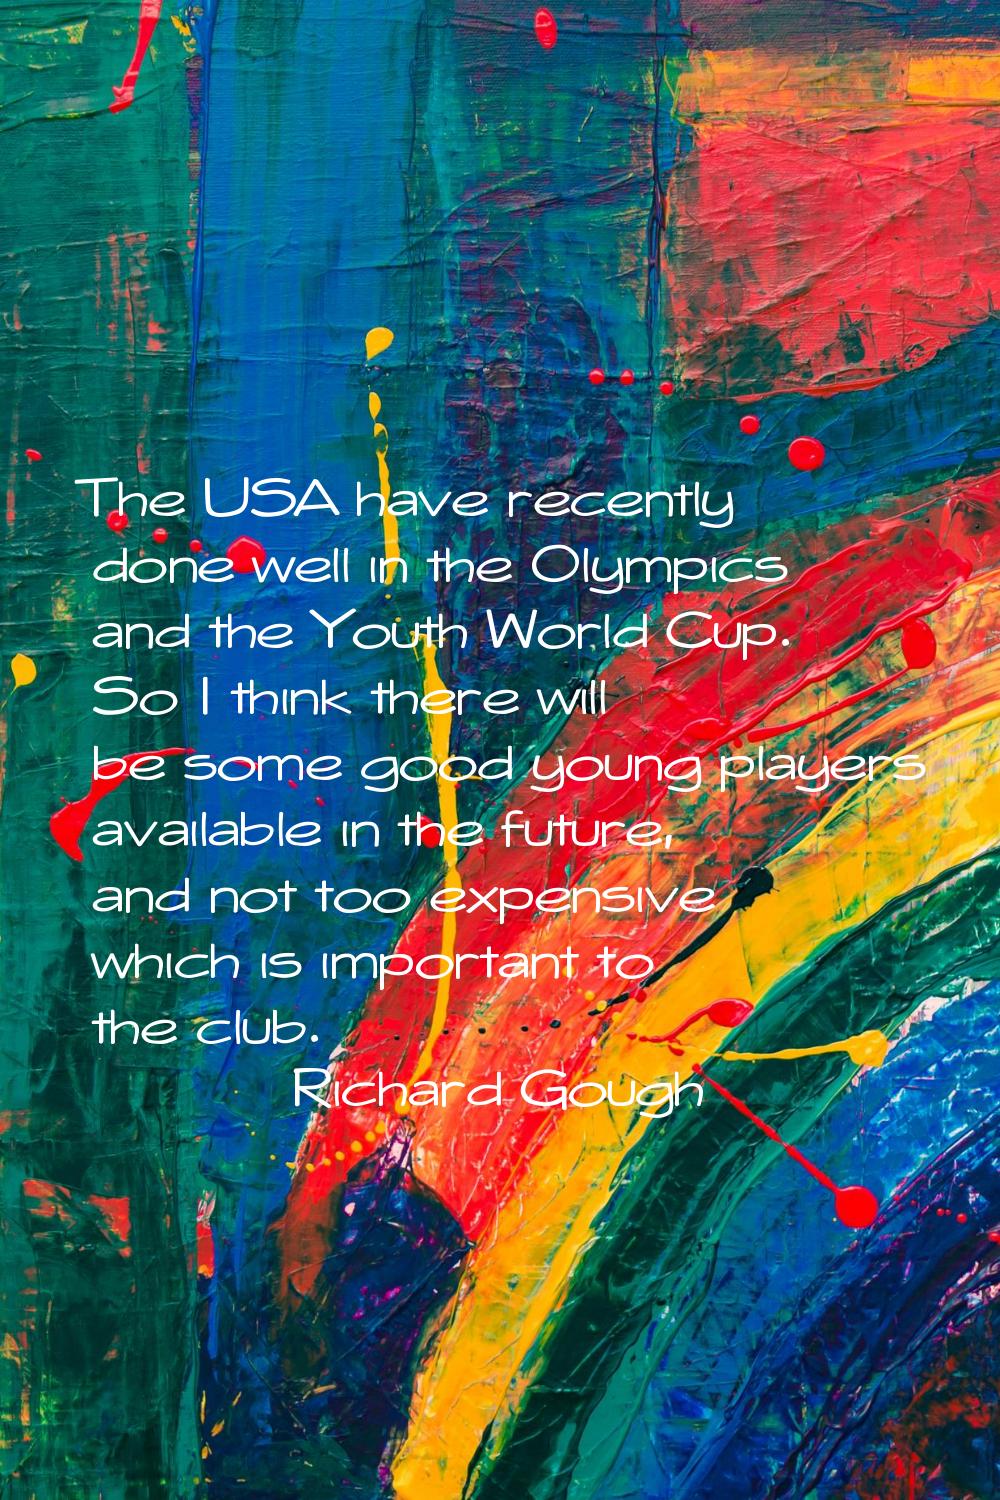 The USA have recently done well in the Olympics and the Youth World Cup. So I think there will be s